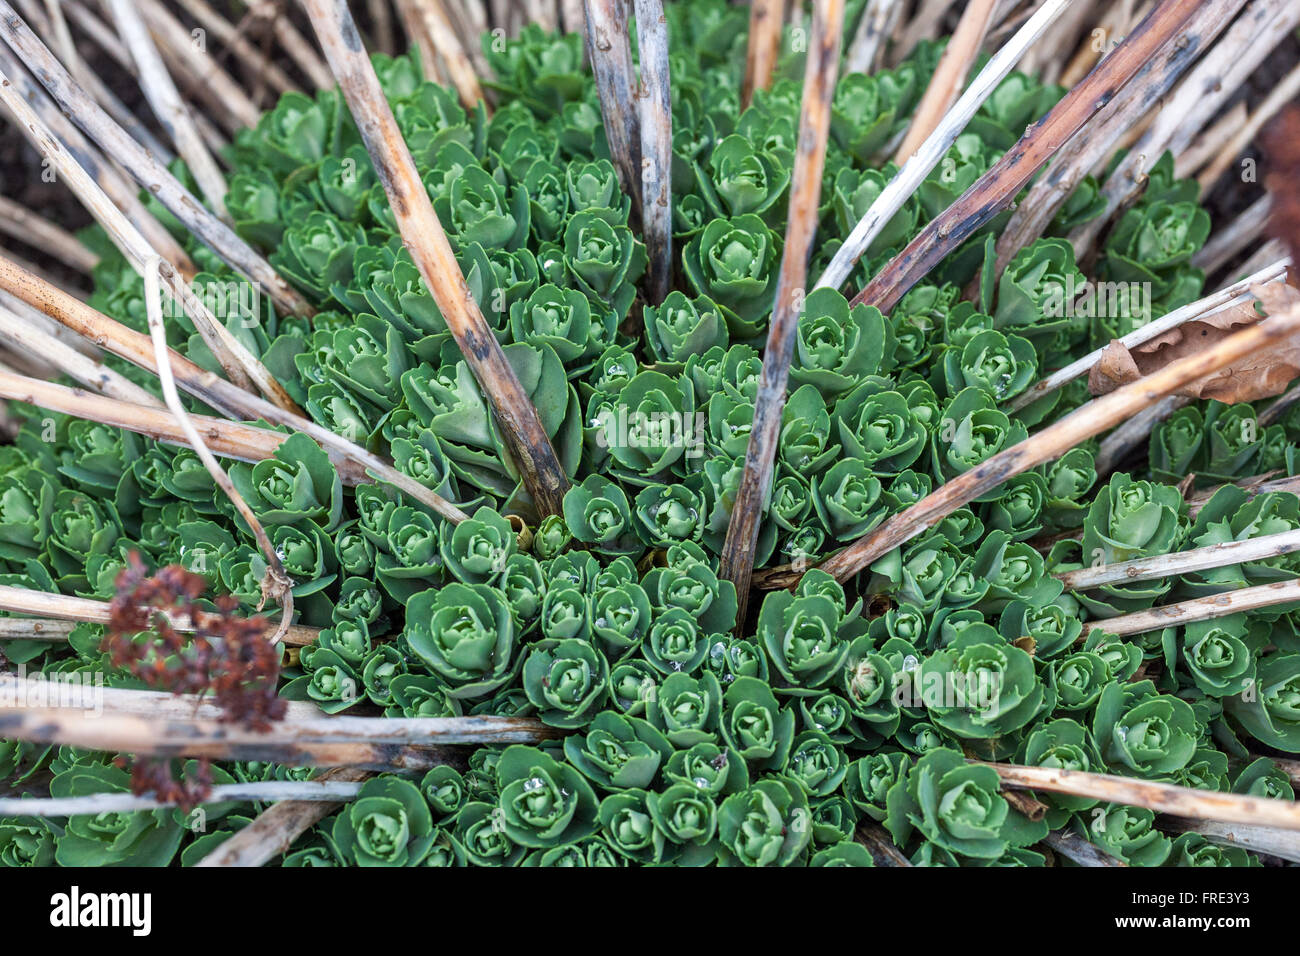 Sedum spectabile, dry stems of dried flowers and fresh new leaves Stock Photo